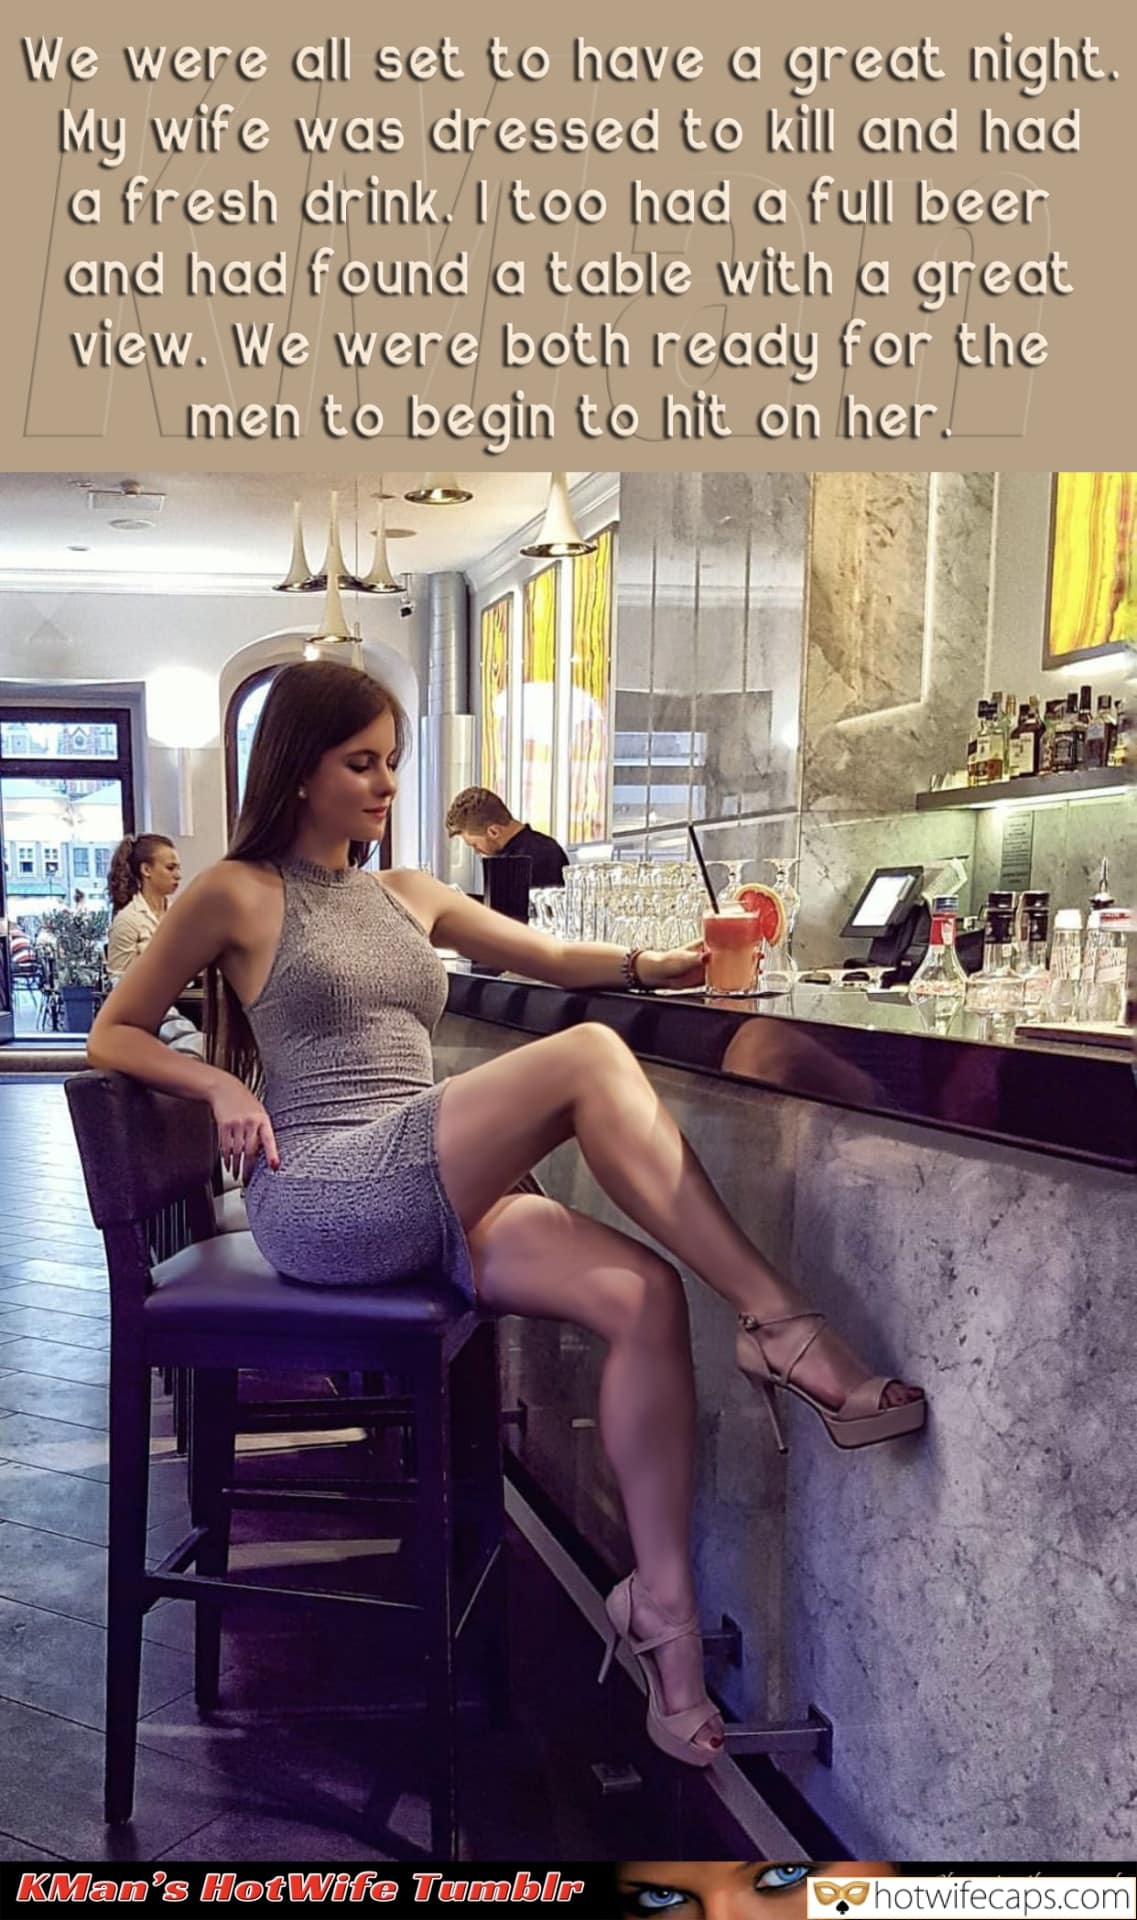 Wife Sharing Sexy Memes Bull Boss hotwife caption: We were all set to have a great night. My wife was dressed to kill and had a fresh drink. I too had a full beer and had found a table with a great view. We were both ready for...